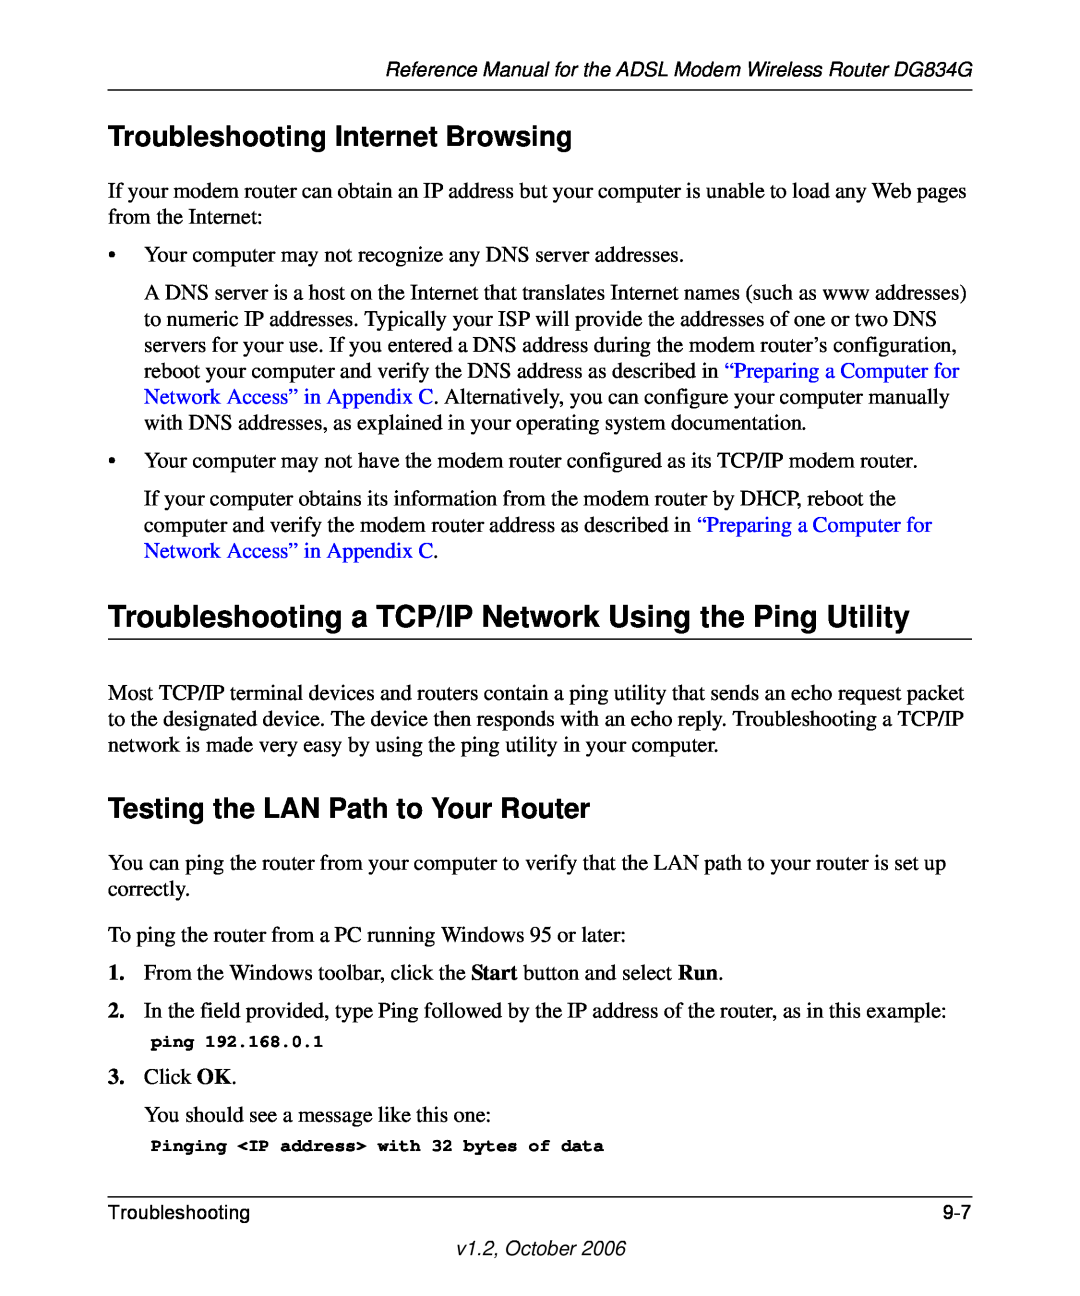 NETGEAR DG834G manual Troubleshooting a TCP/IP Network Using the Ping Utility, Troubleshooting Internet Browsing 